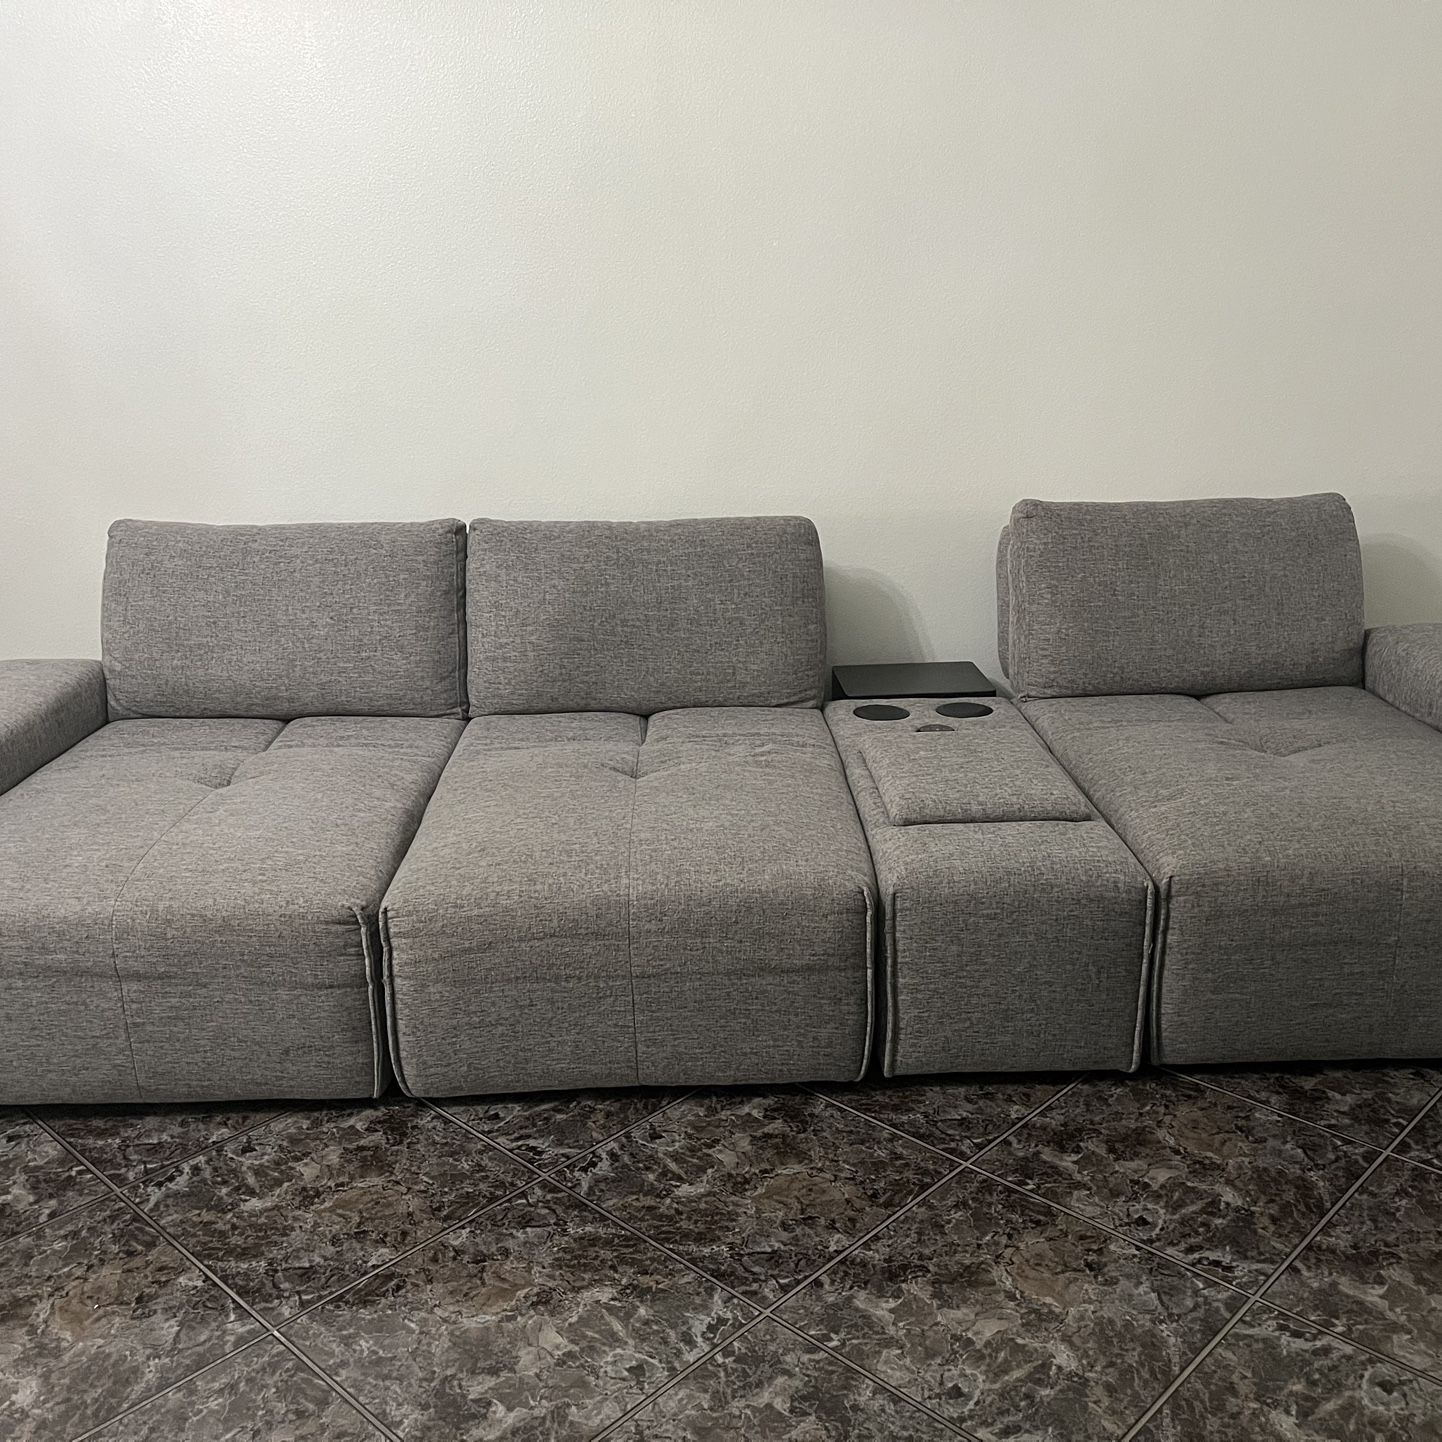 Gently Used 8 Piece Sectional With Bluetooth Storage Speaker 